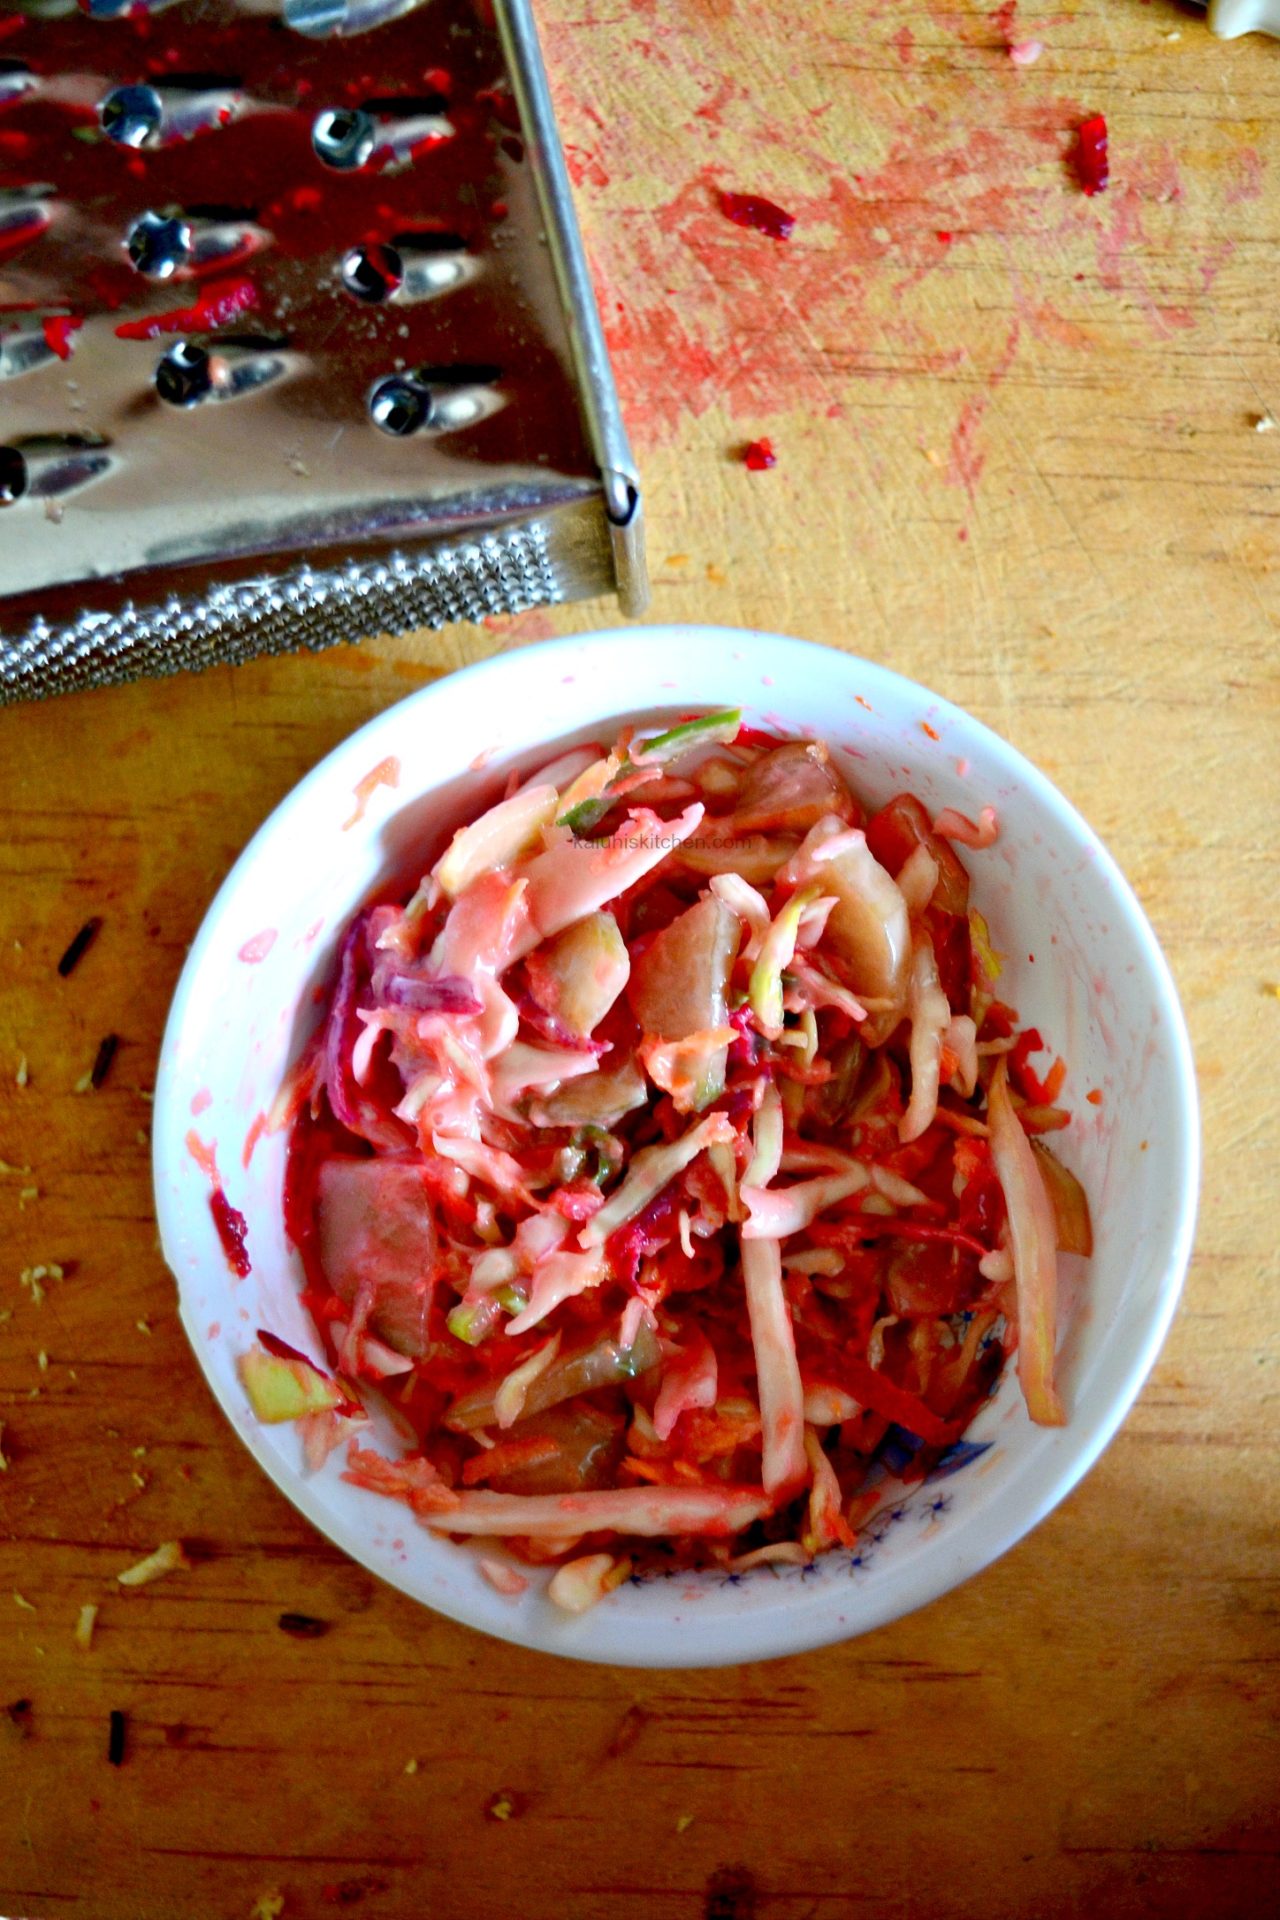 make your left over slaw alot more palatable by adding some fresh ginger and some beet for color and more flavor and nutrients